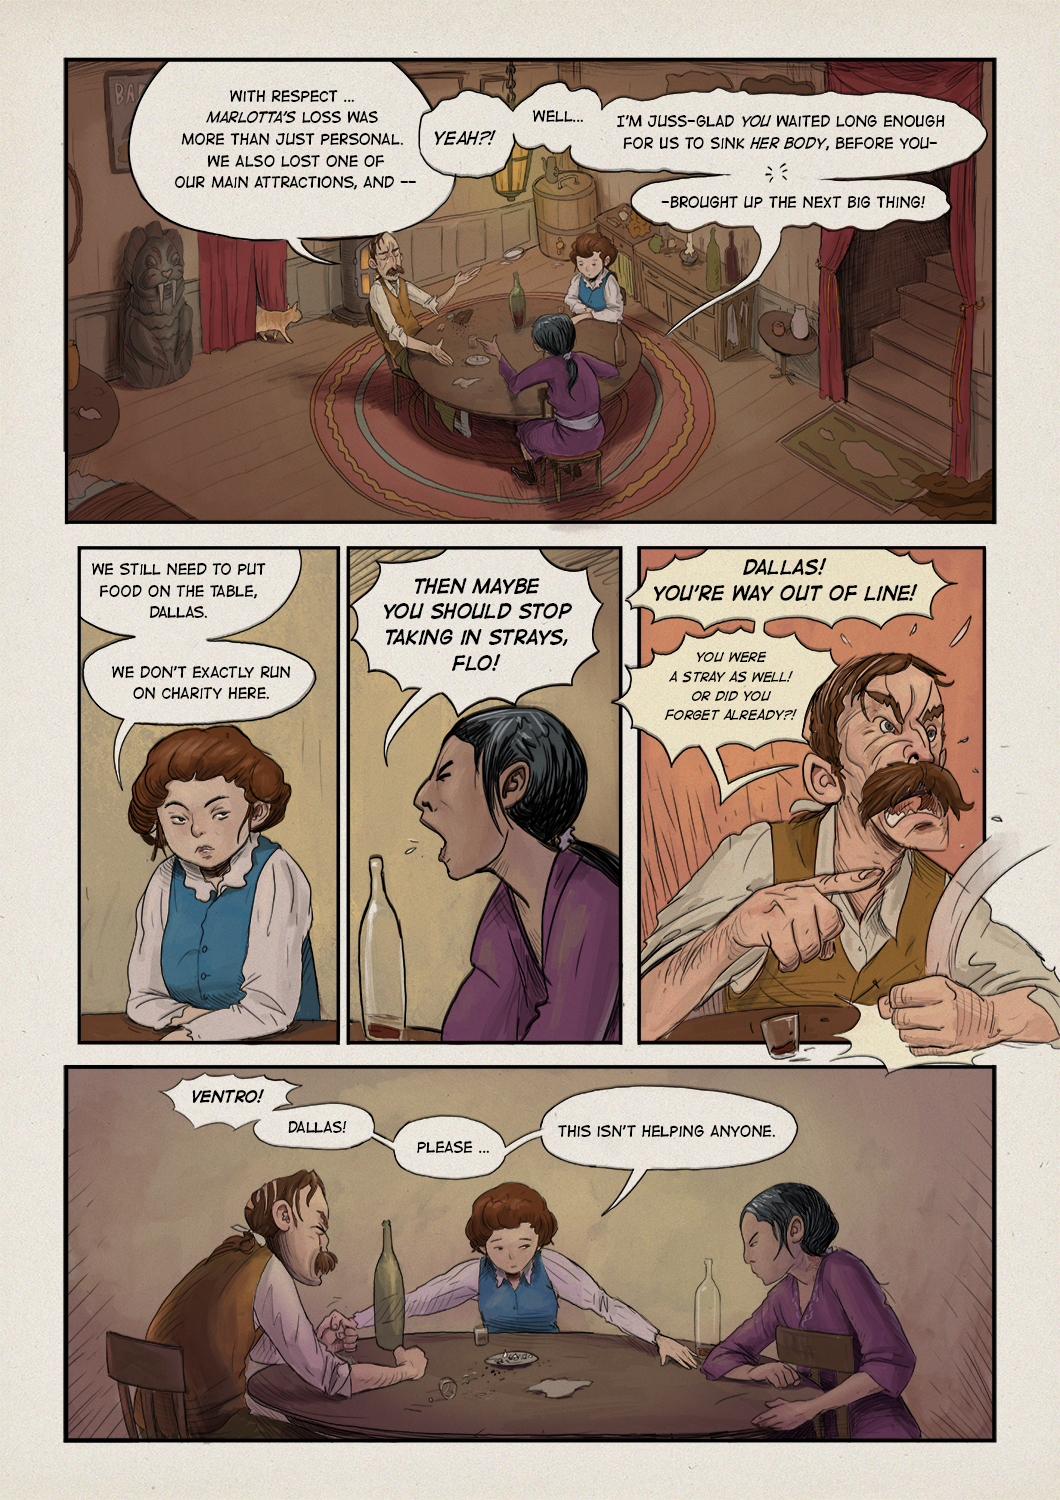 WaterFront chapter two, page 5